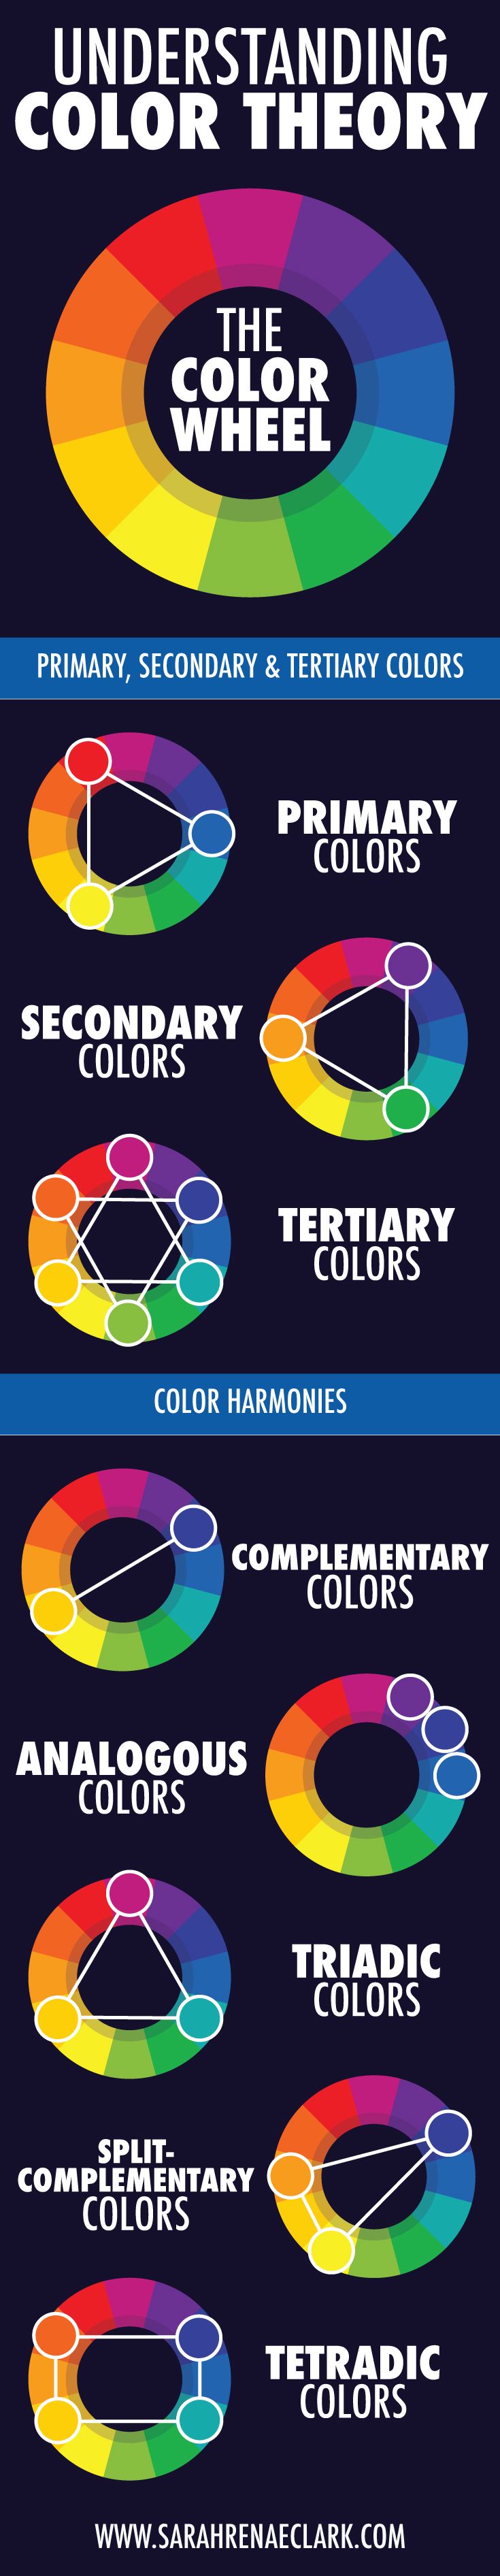 color wheel primary secondary tertiary psd